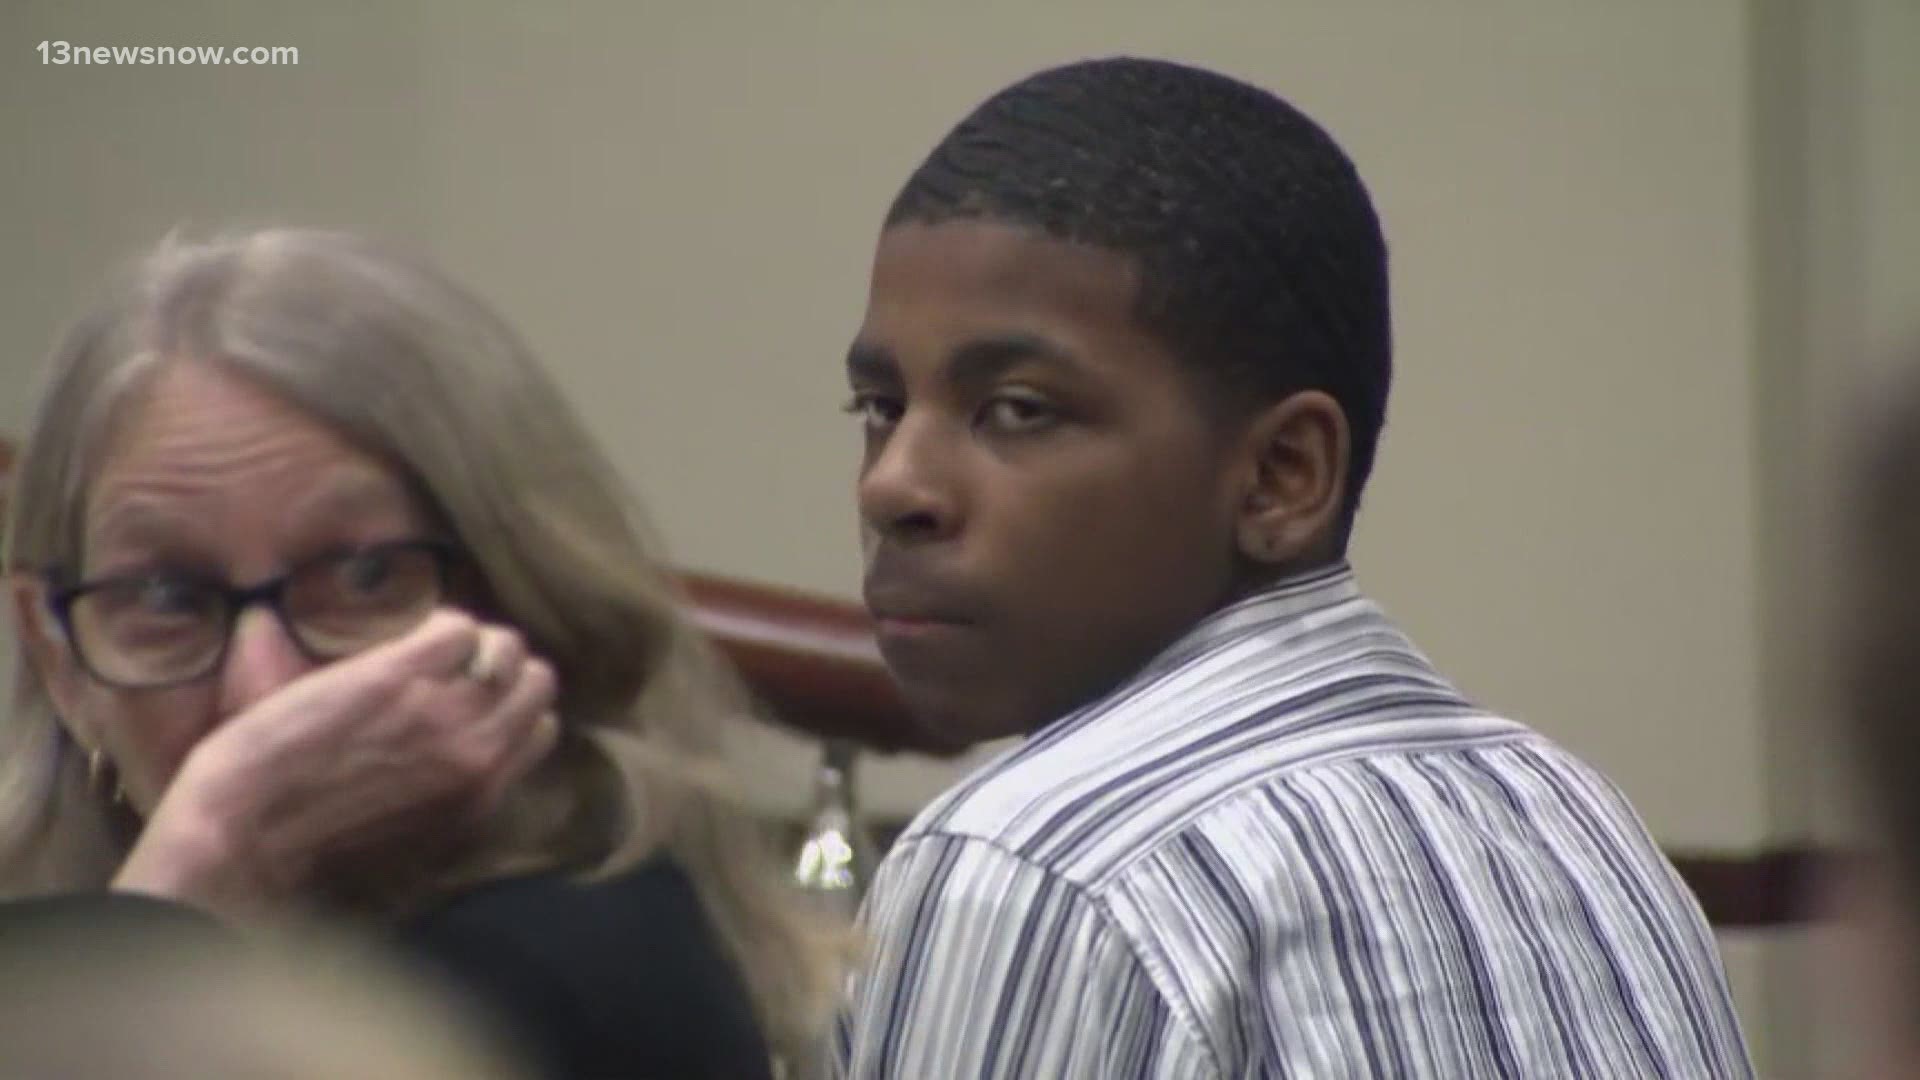 Will Patterson, the teenager convicted of shooting a Portsmouth police officer, was granted a new trial.